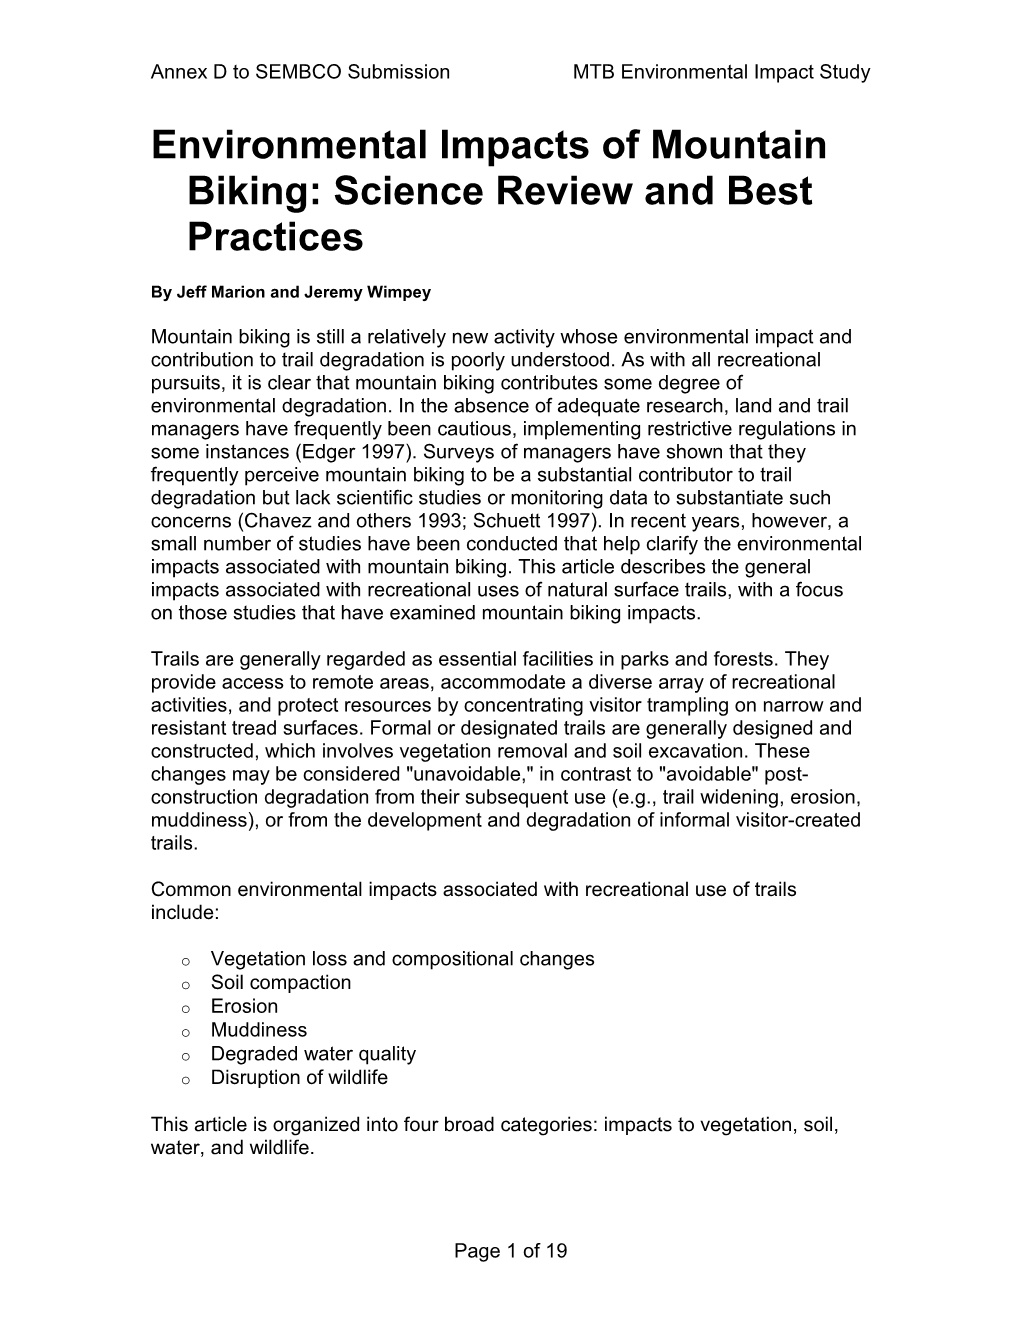 Environmental Impacts of Mountain Biking: Science Review and Best Practices